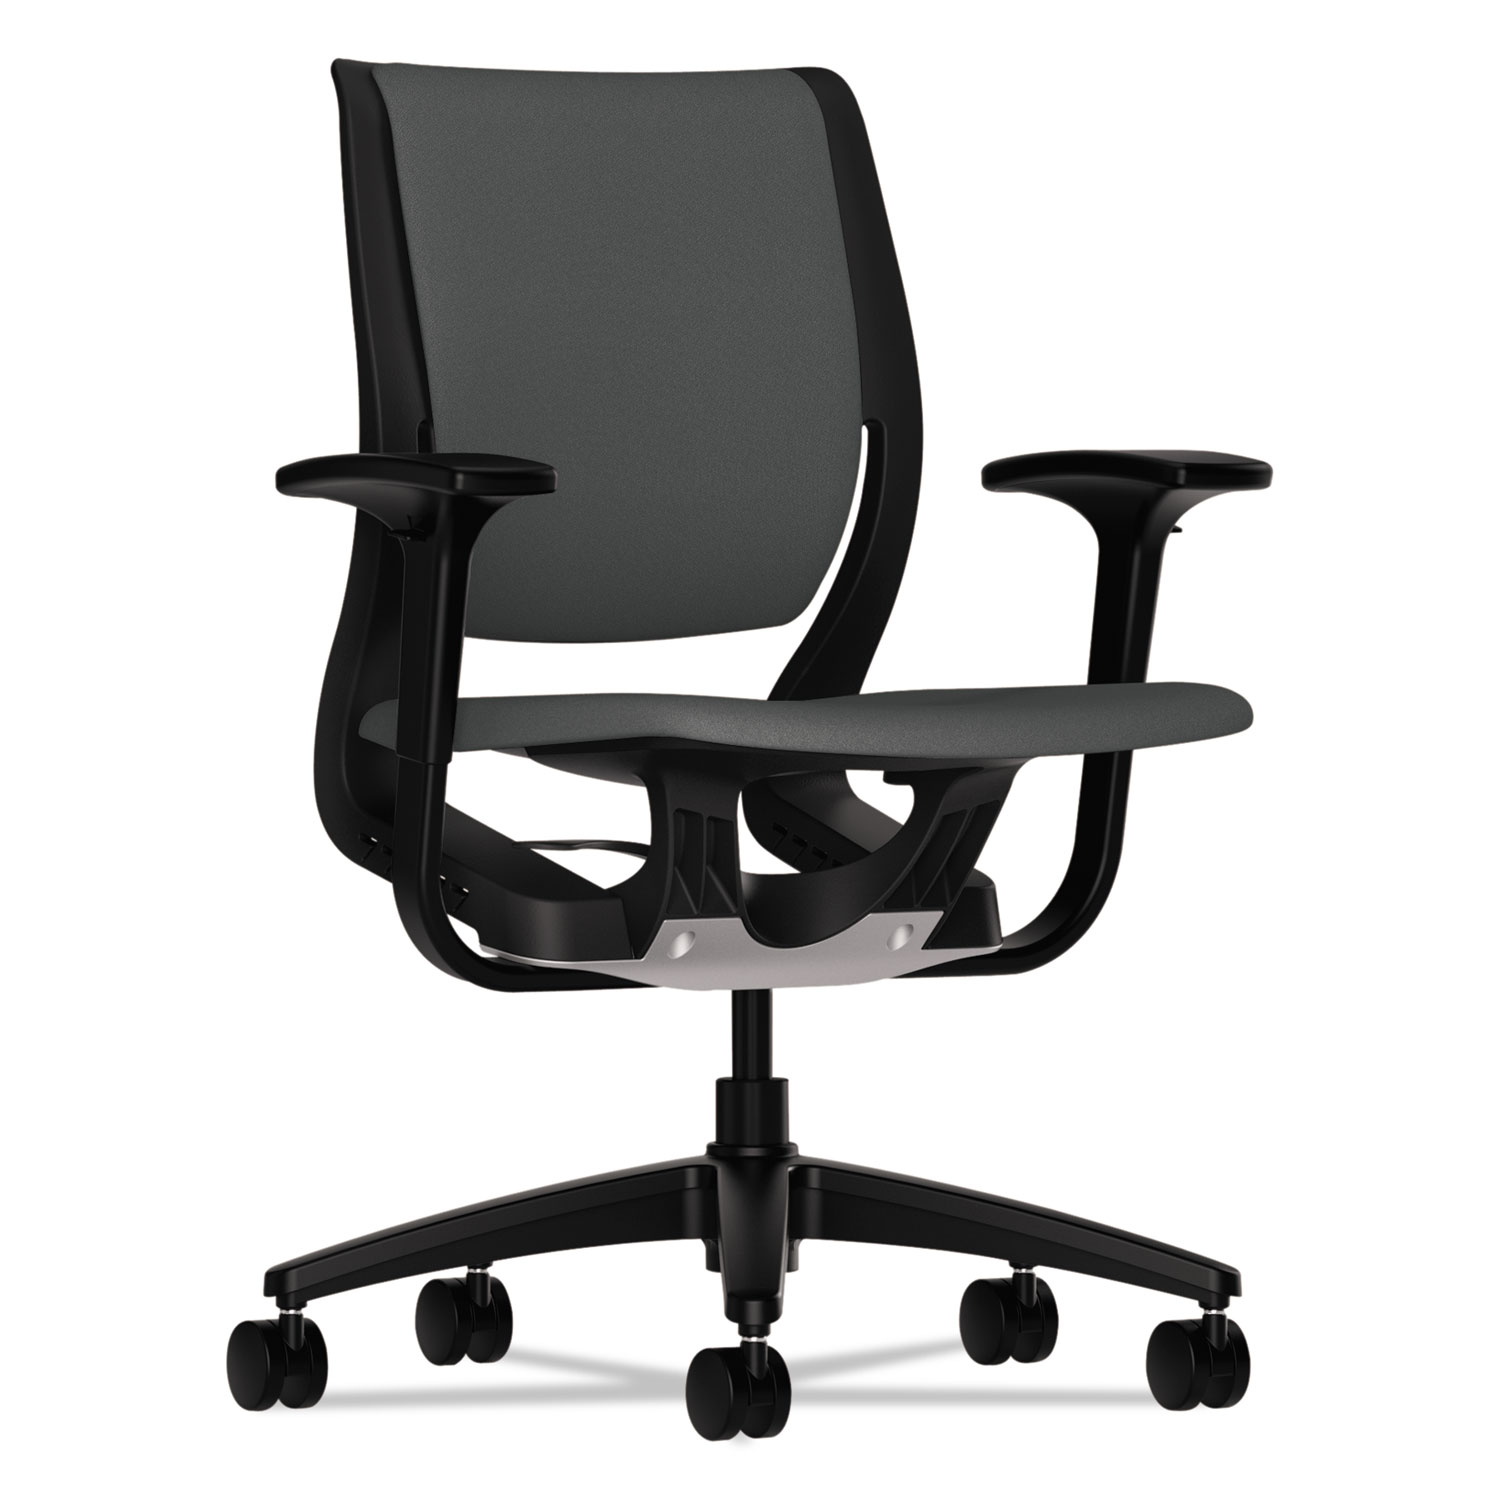  HON HR1W.ABLK.H.ON.CU19.T Purpose Upholstered Flexing Task Chair, Supports up to 300 lbs., Iron Ore Seat/Iron Ore Back, Black Base (HONRW101ONCU19) 